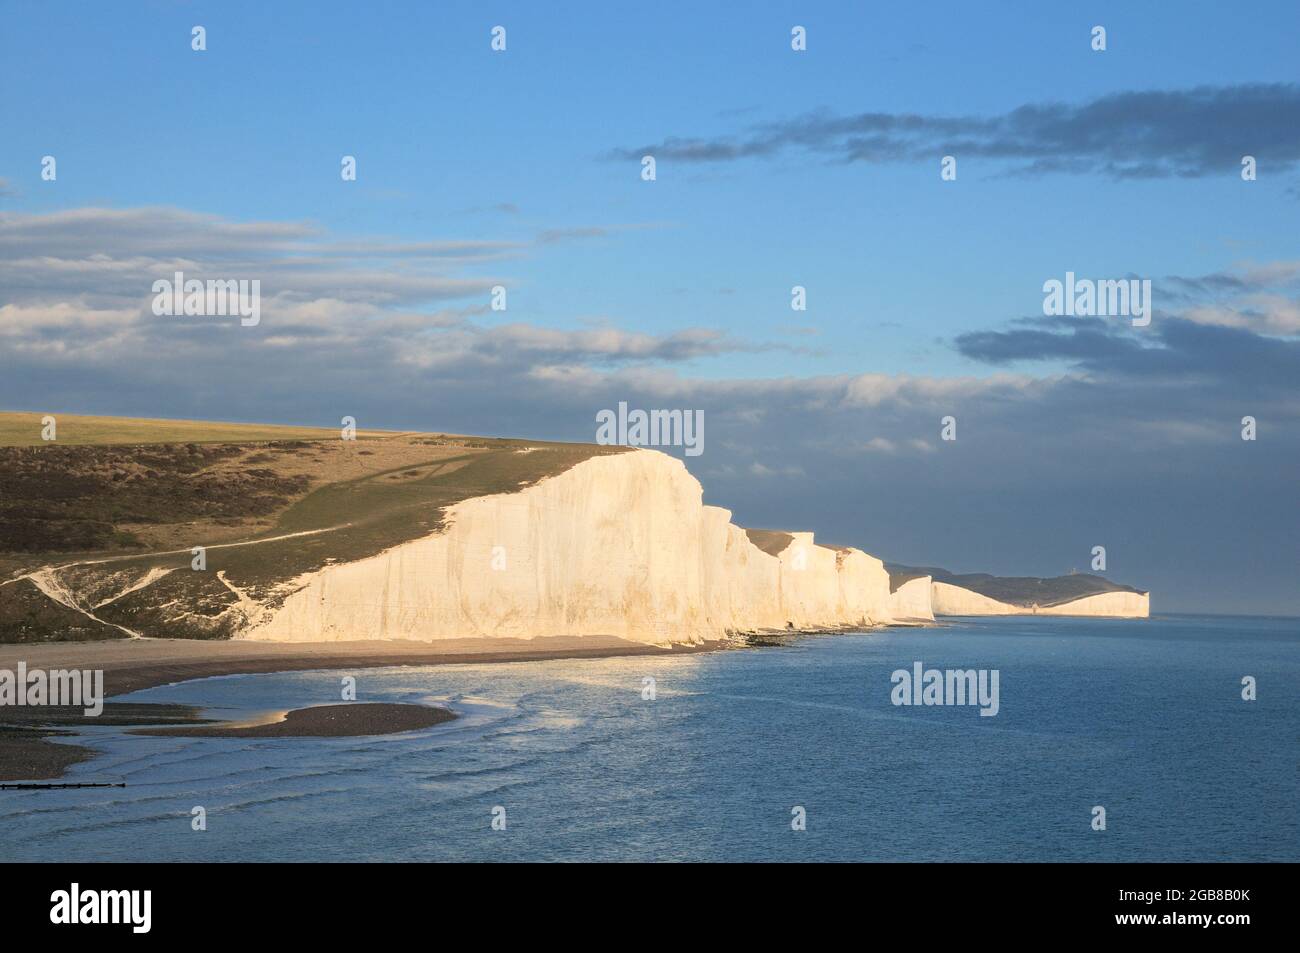 Early evening sunlight bathes the famous Seven Sisters chalk cliffs on the south coast of England, between Seaford and Eastbourne, East Sussex, UK Stock Photo